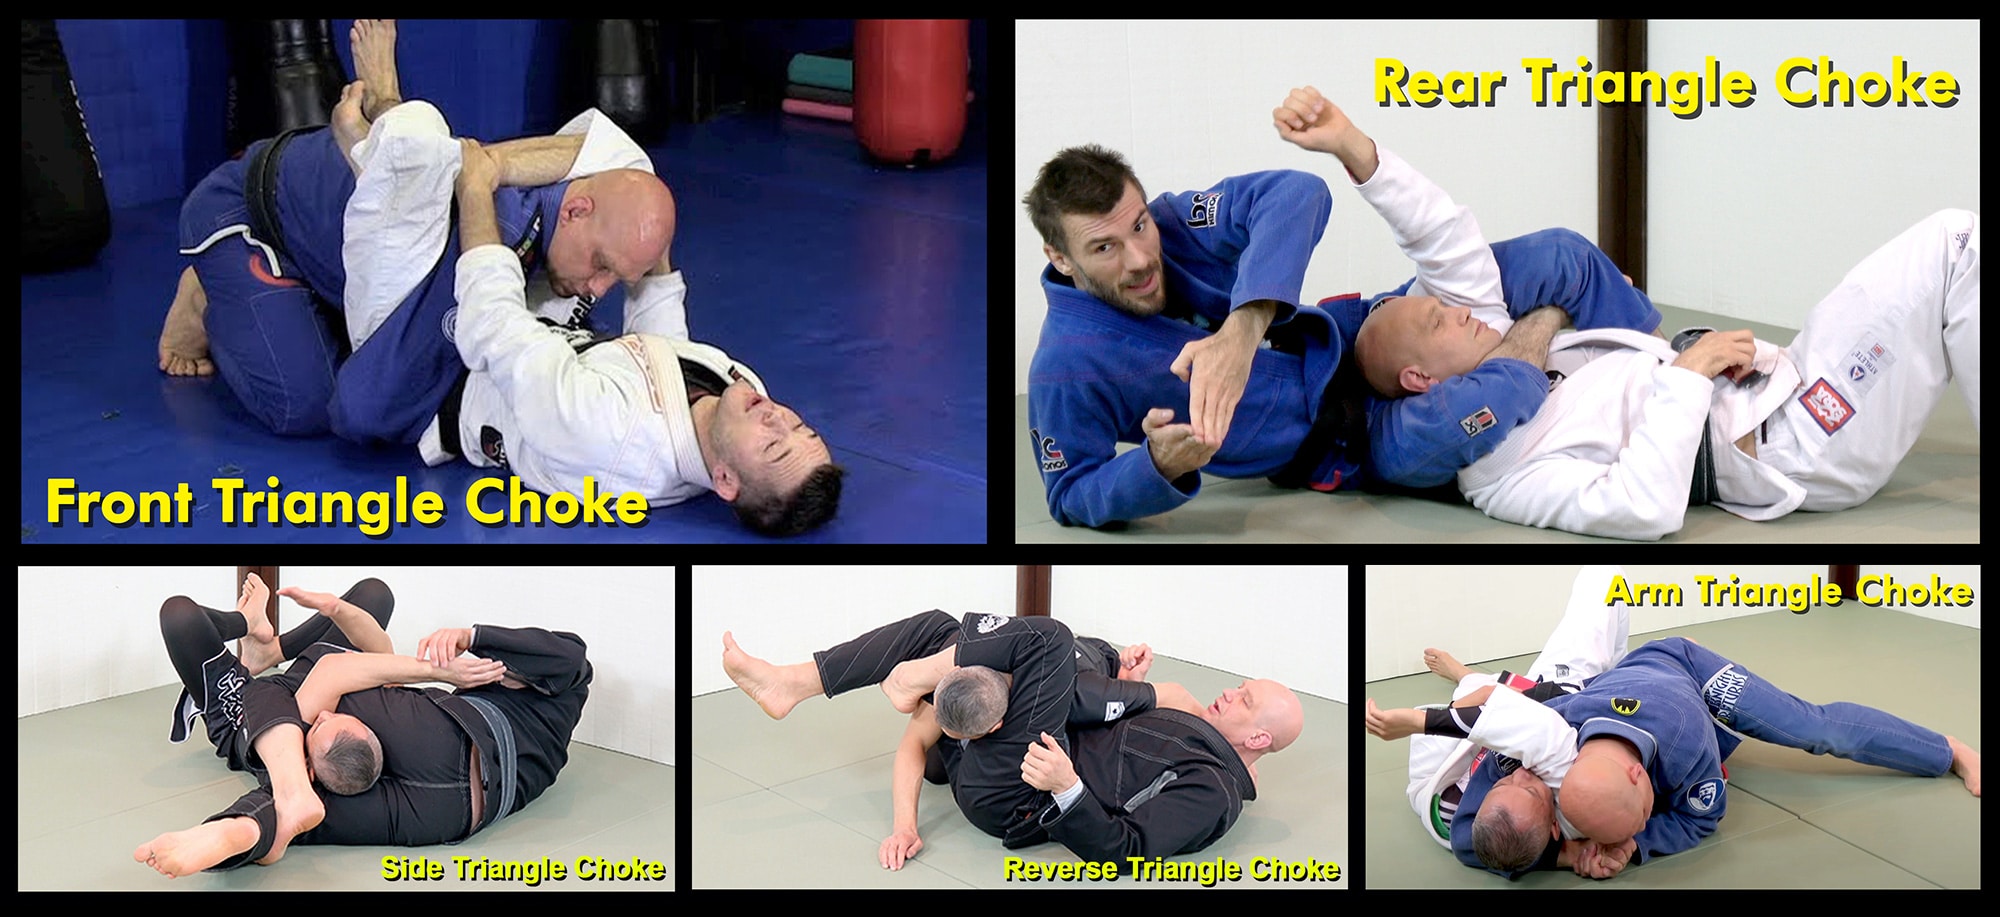 https://www.grapplearts.com/wp-content/uploads/2018/05/5-types-of-triangle-chokes.jpg